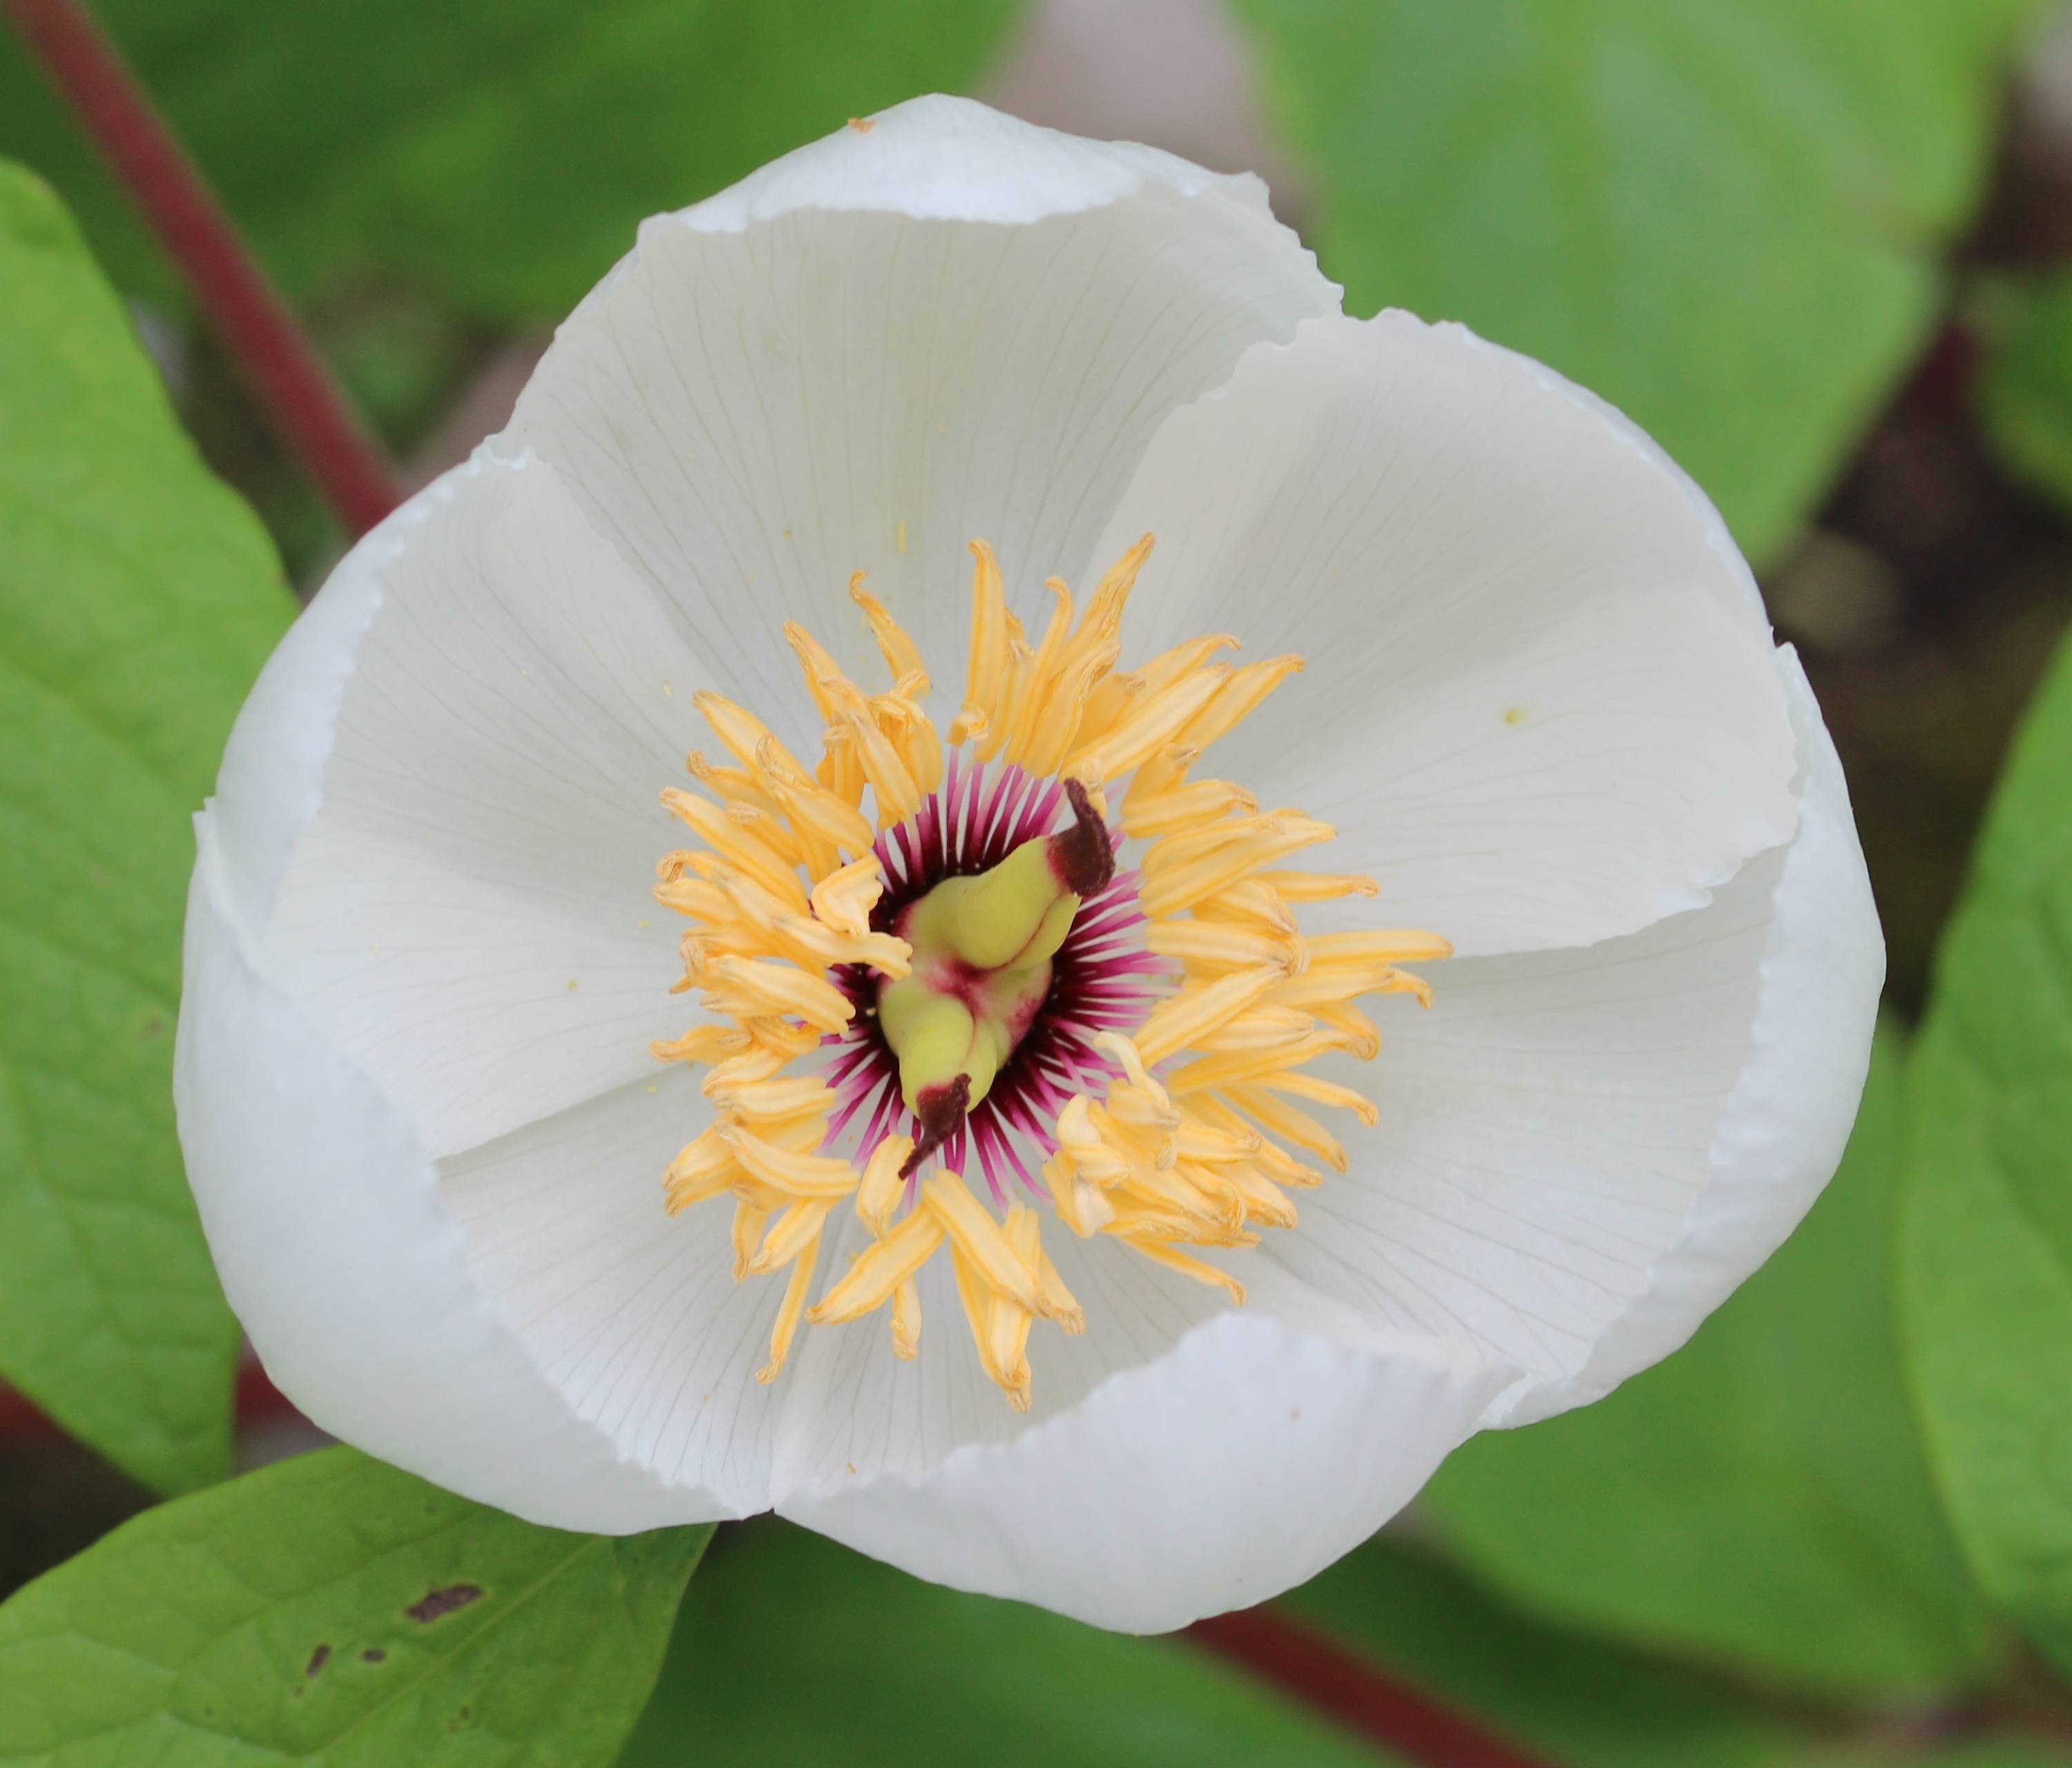 white, saucer-like, shiny flower with creamy-pale anthers and burgundy filaments